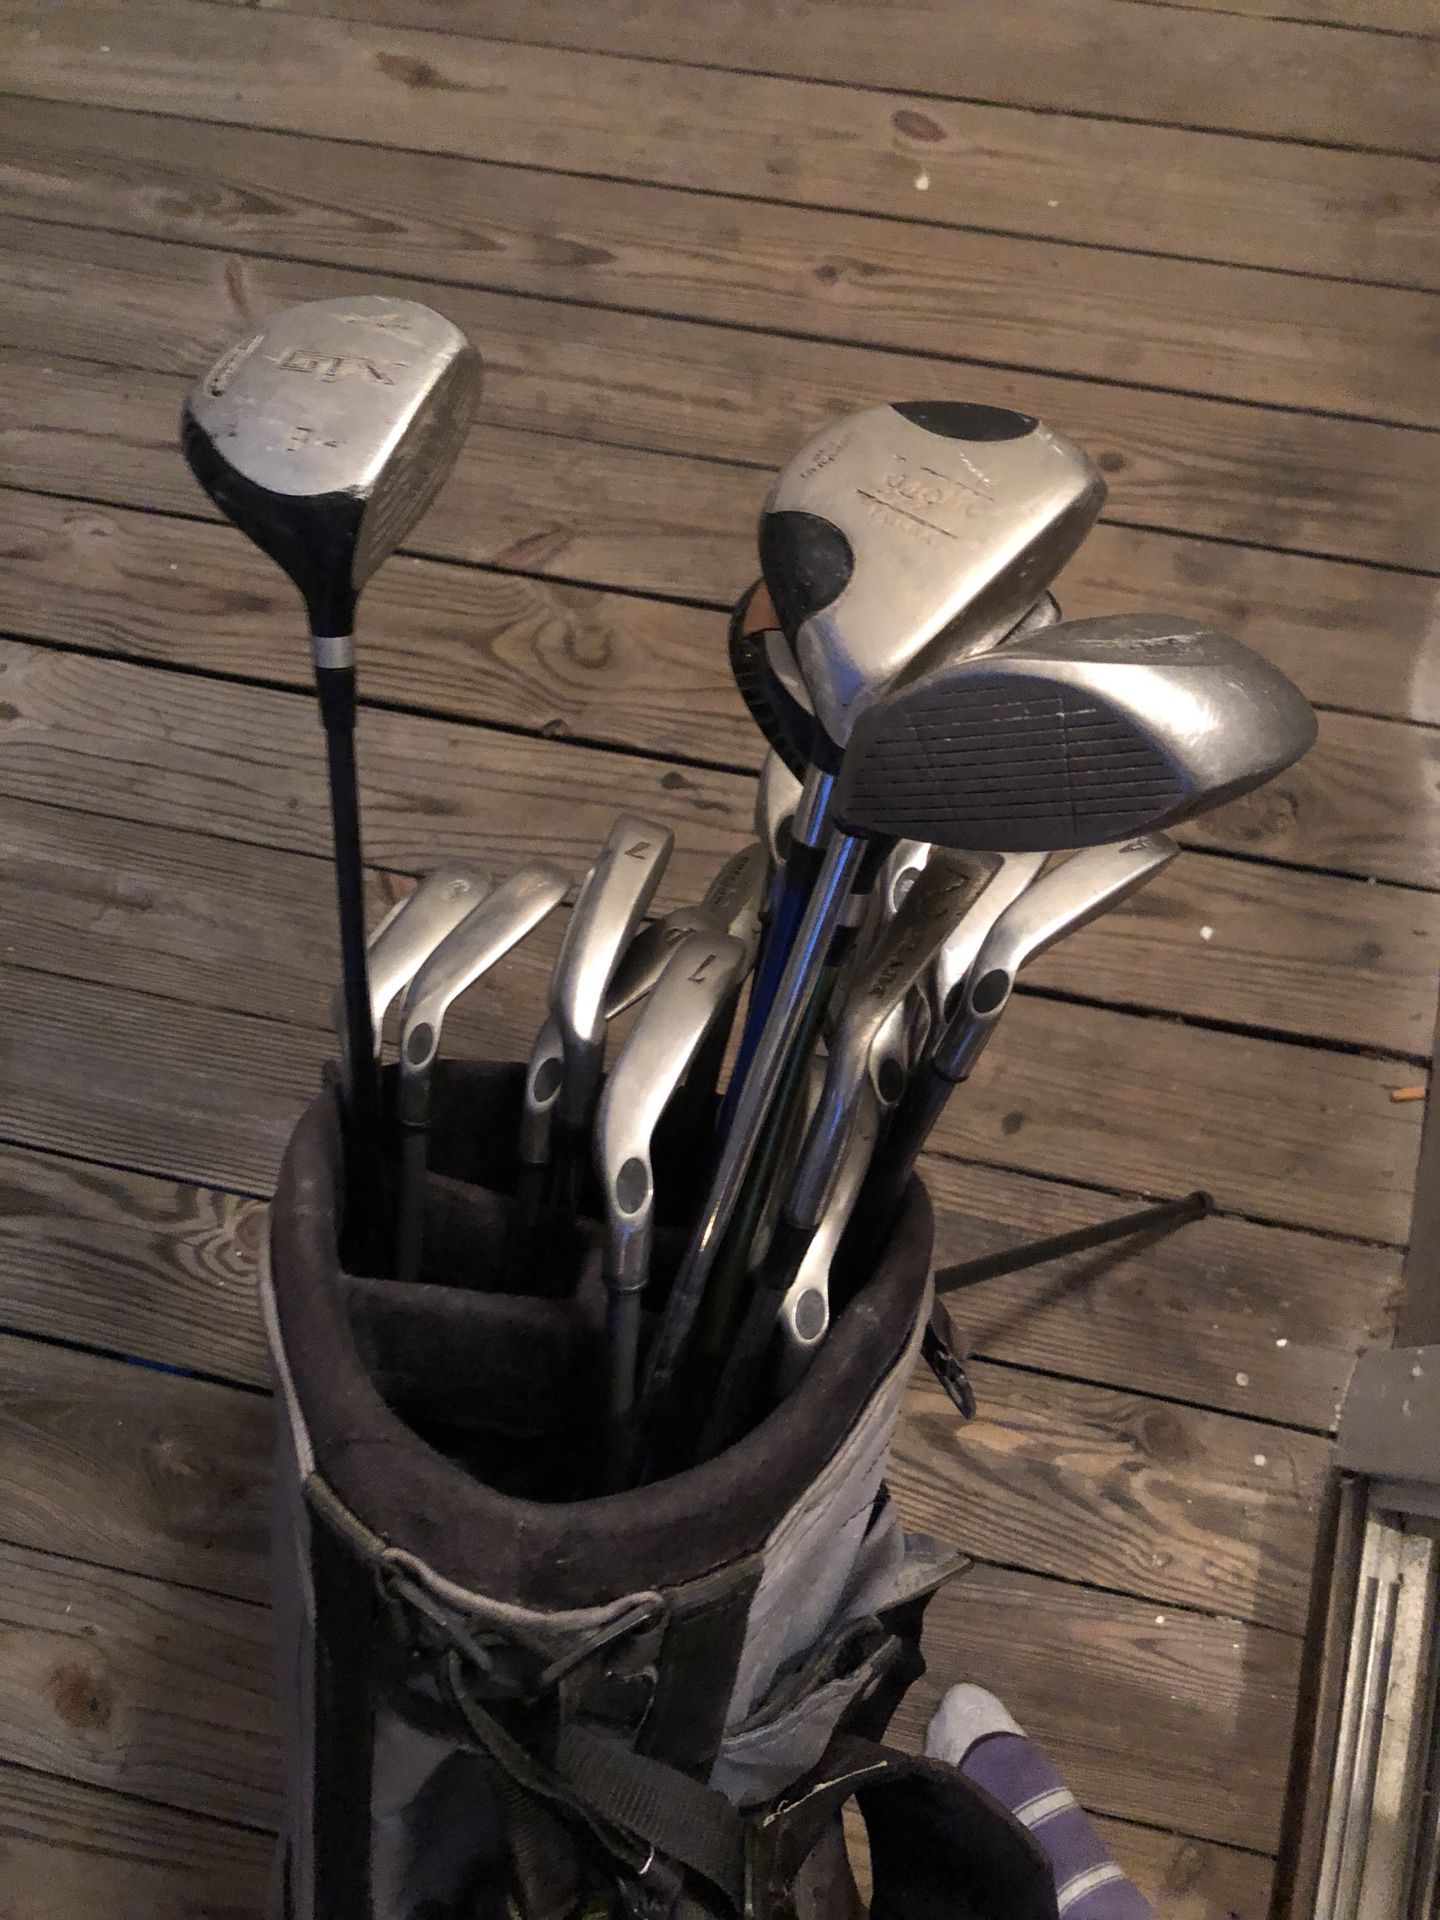 Golf clubs with standing bad